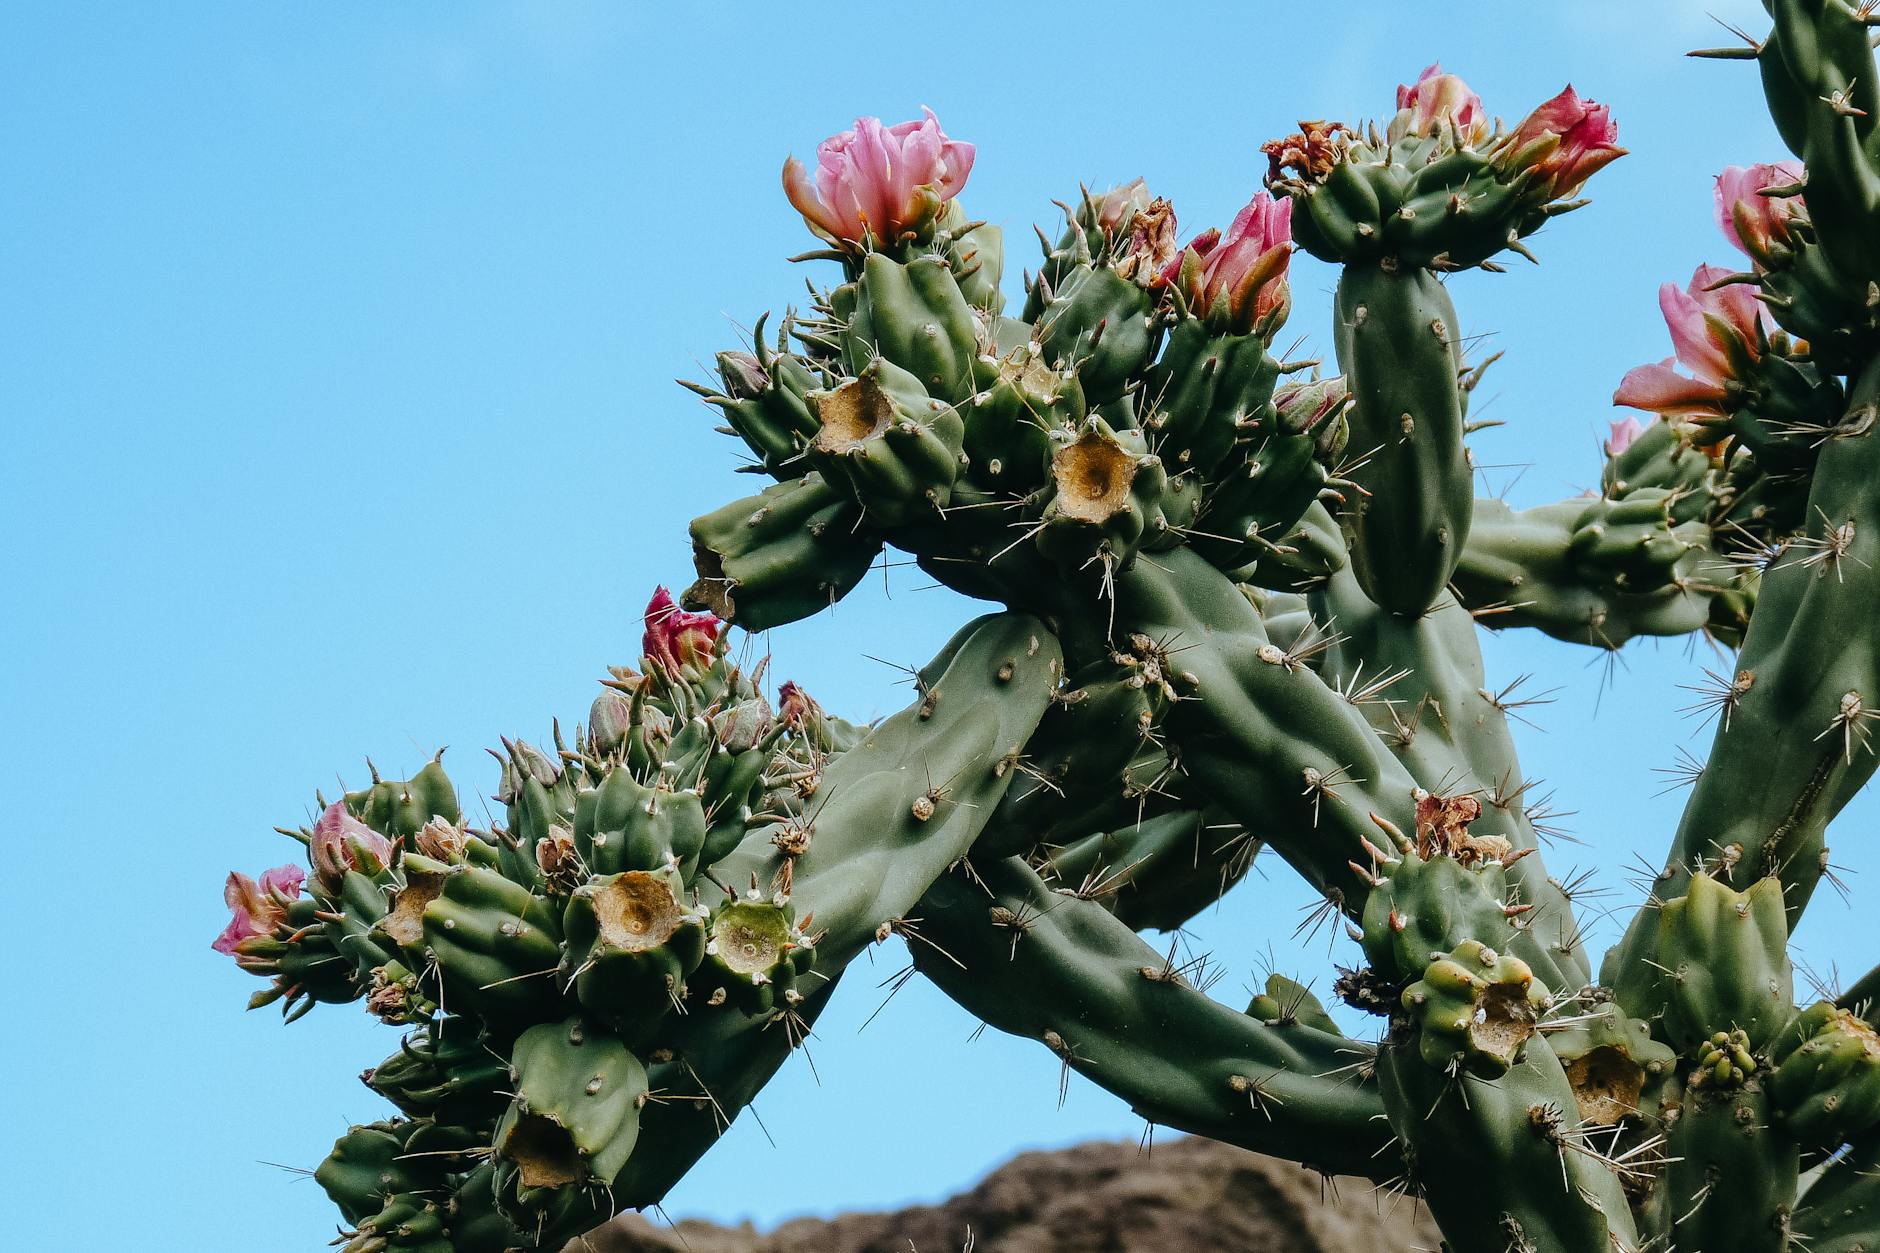 blooming cactus under clear blue sky